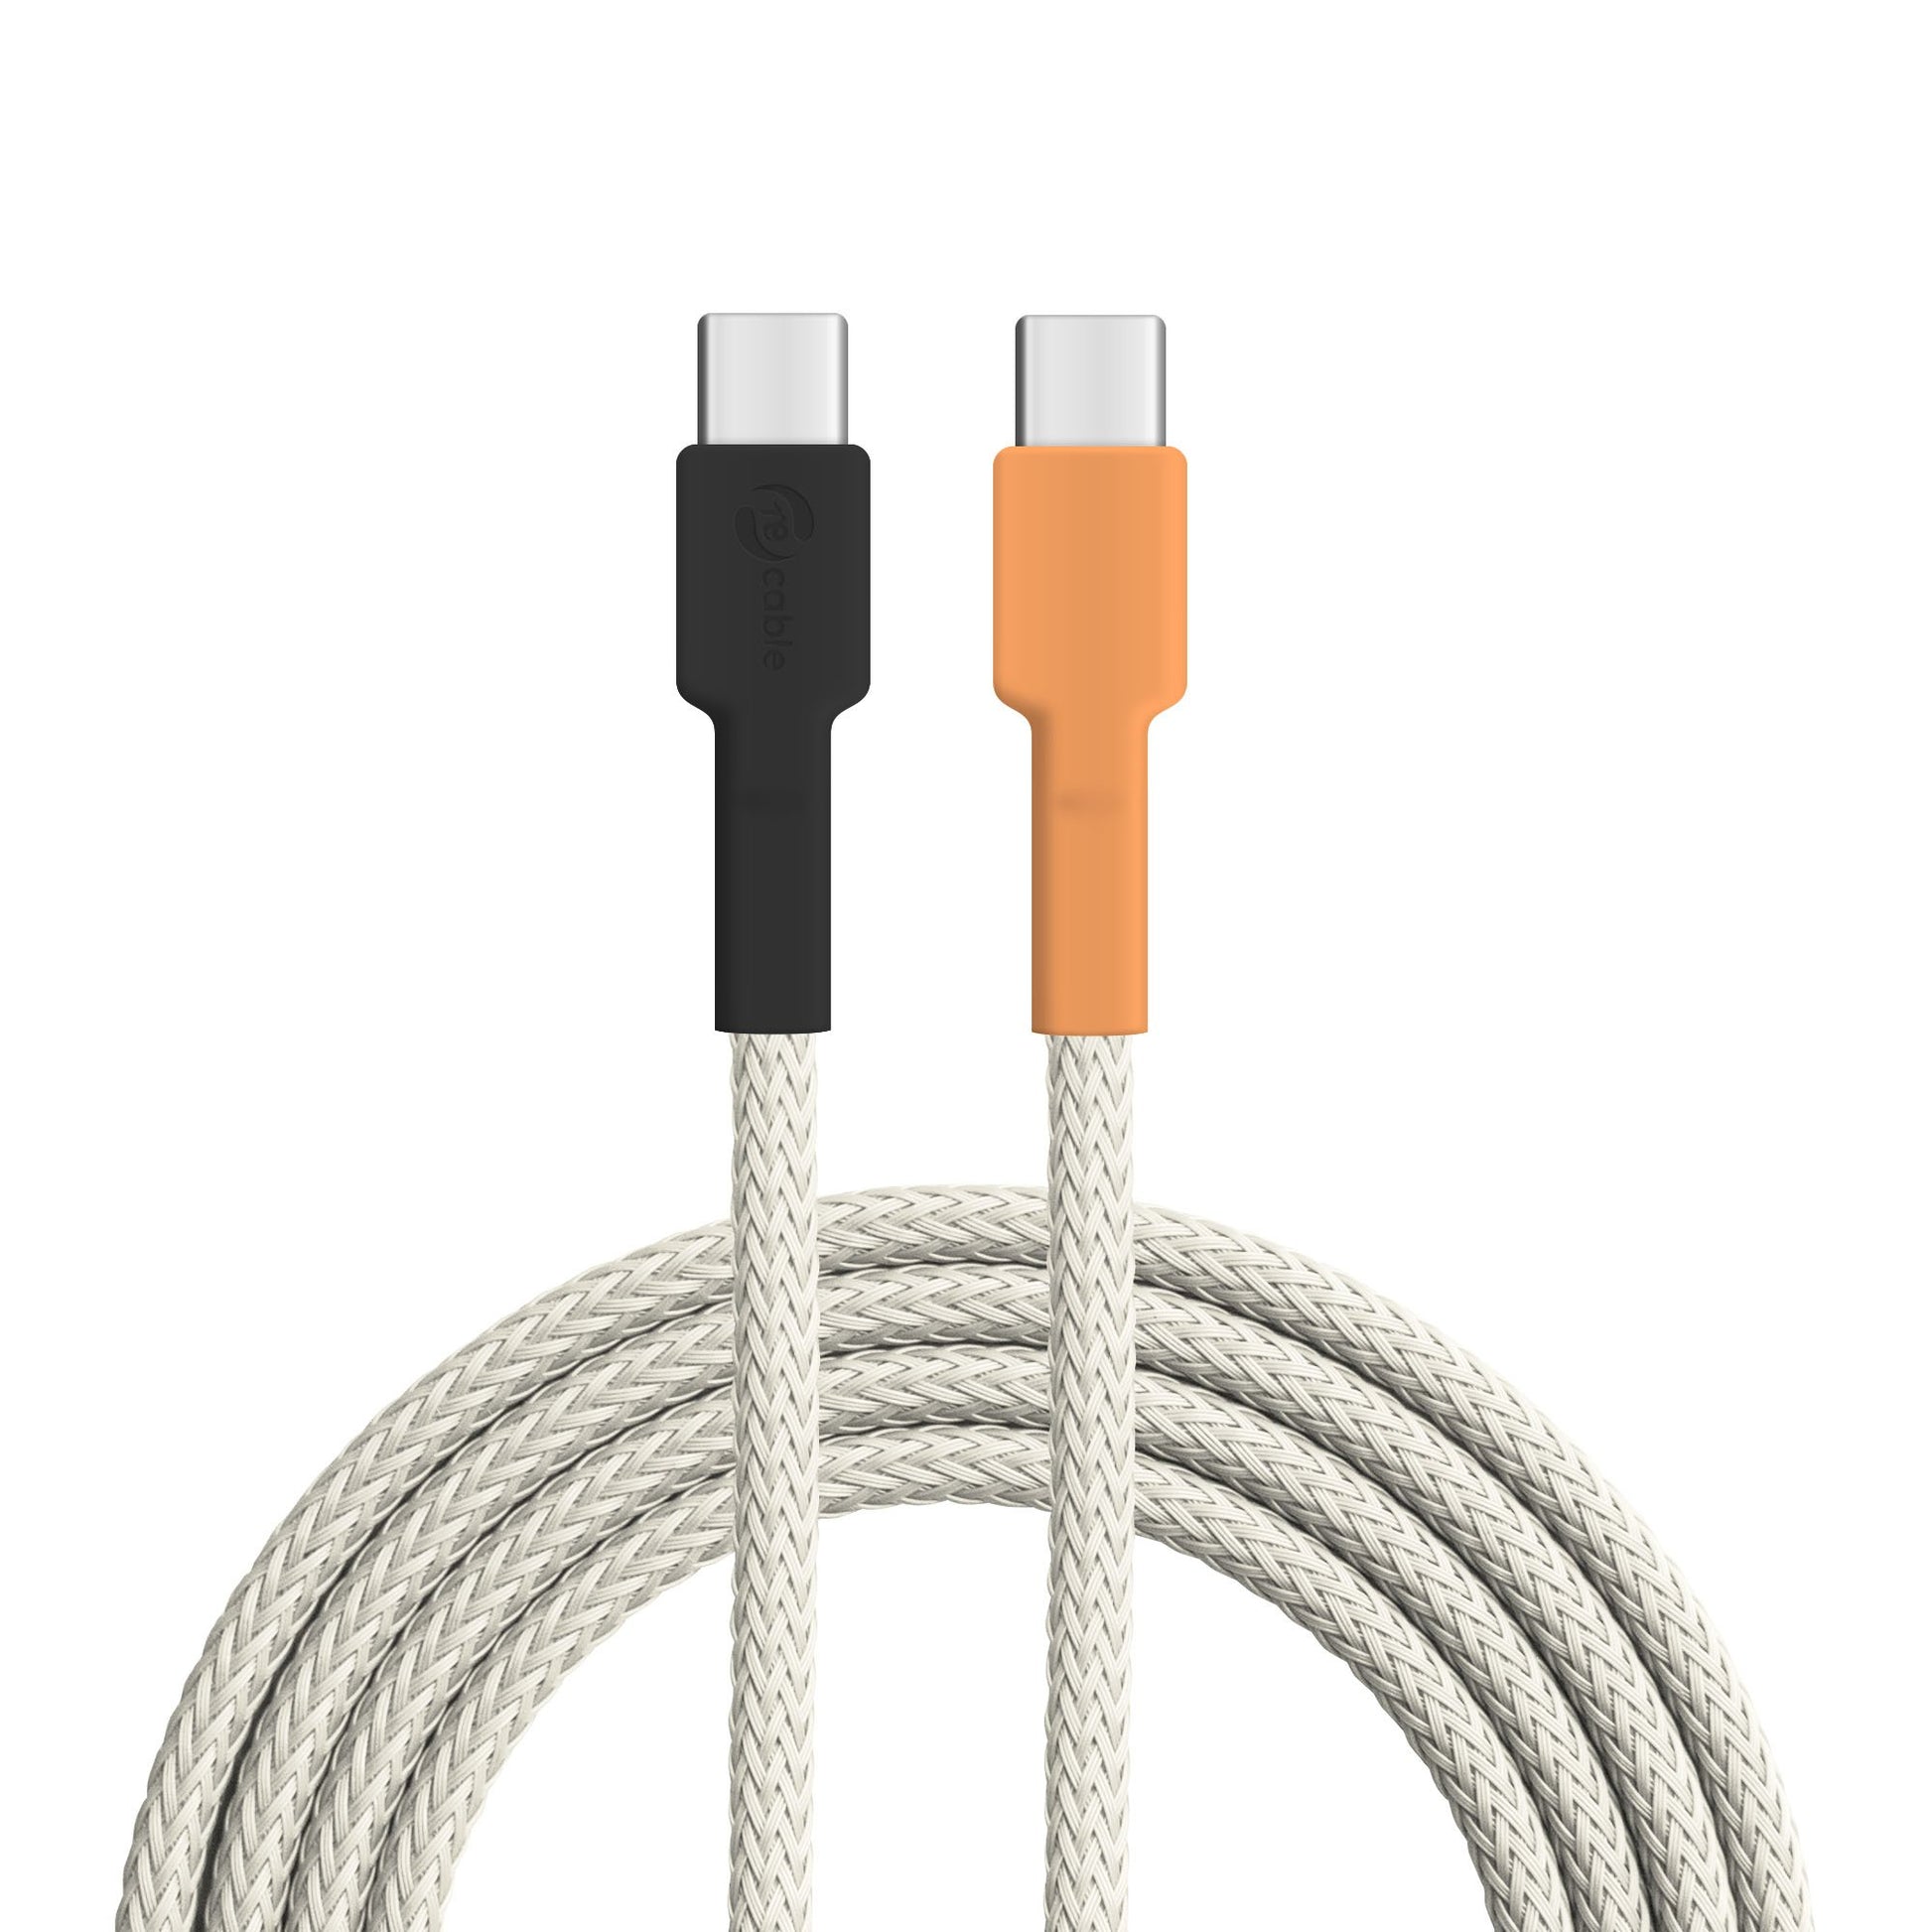 USB cable, Design: King penguin, Connections: USB C on USB C